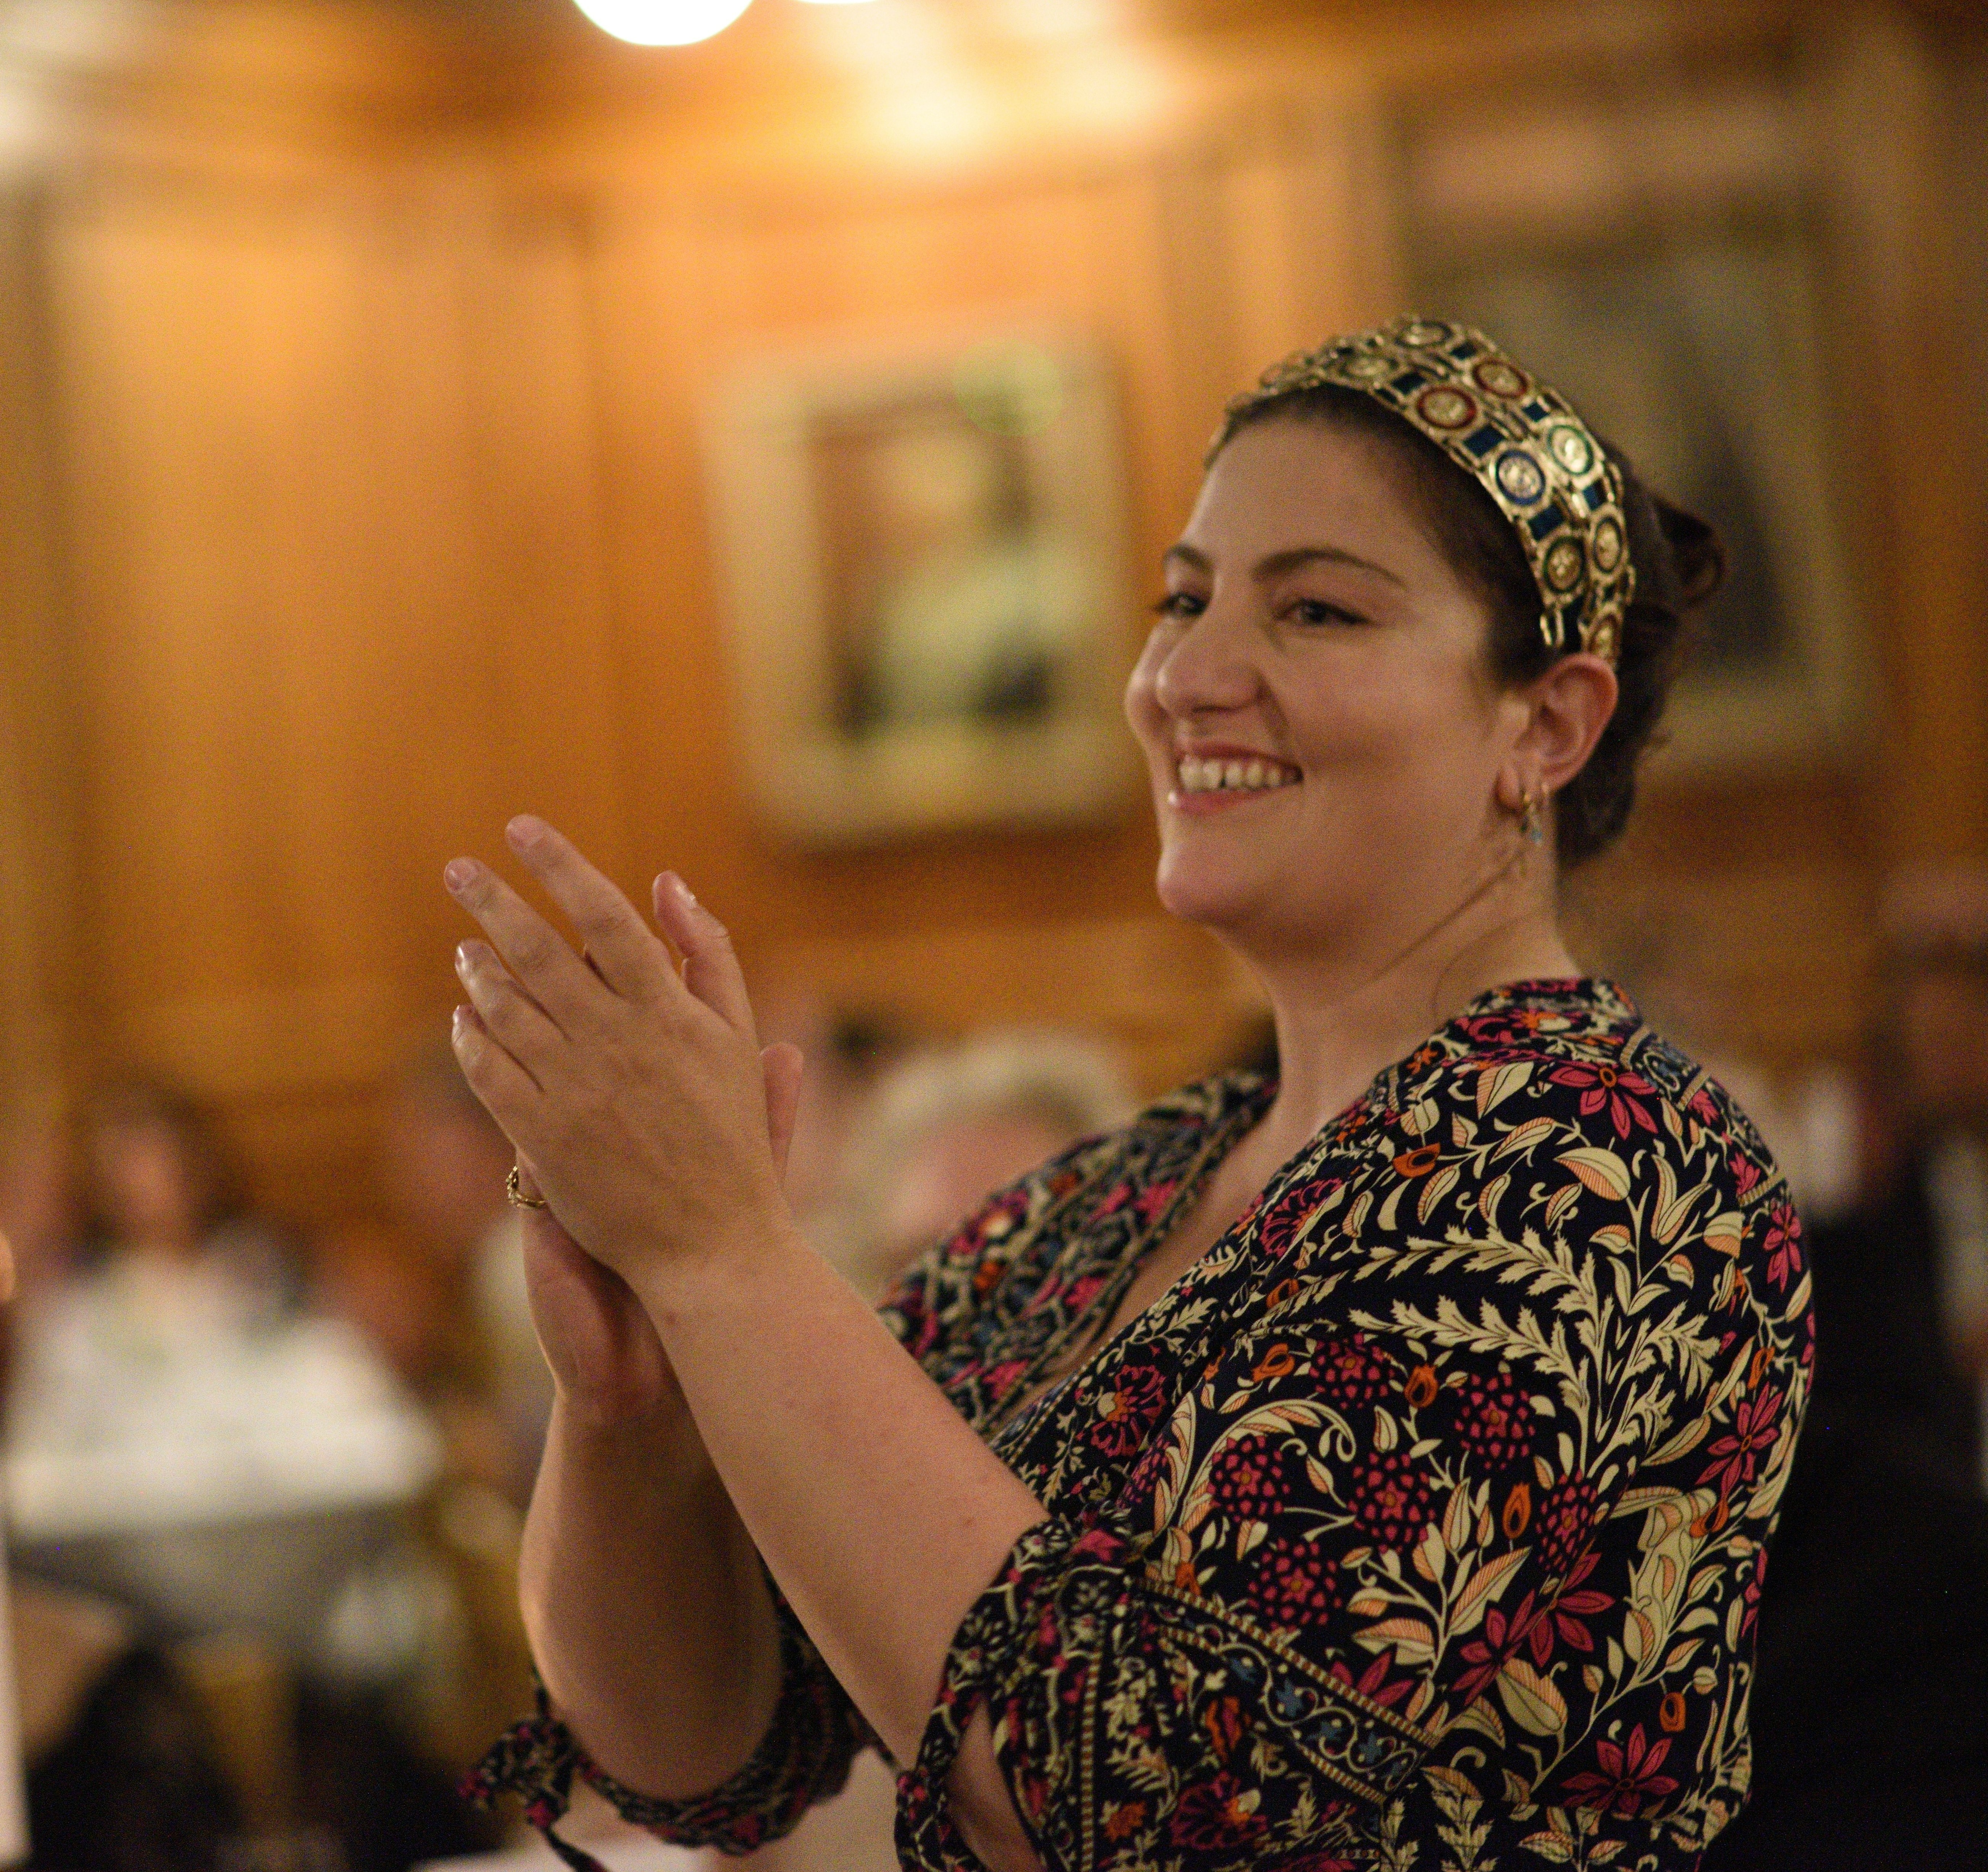 Cevanne Horrocks-Hopayian applauding in Great Hall, Girton College